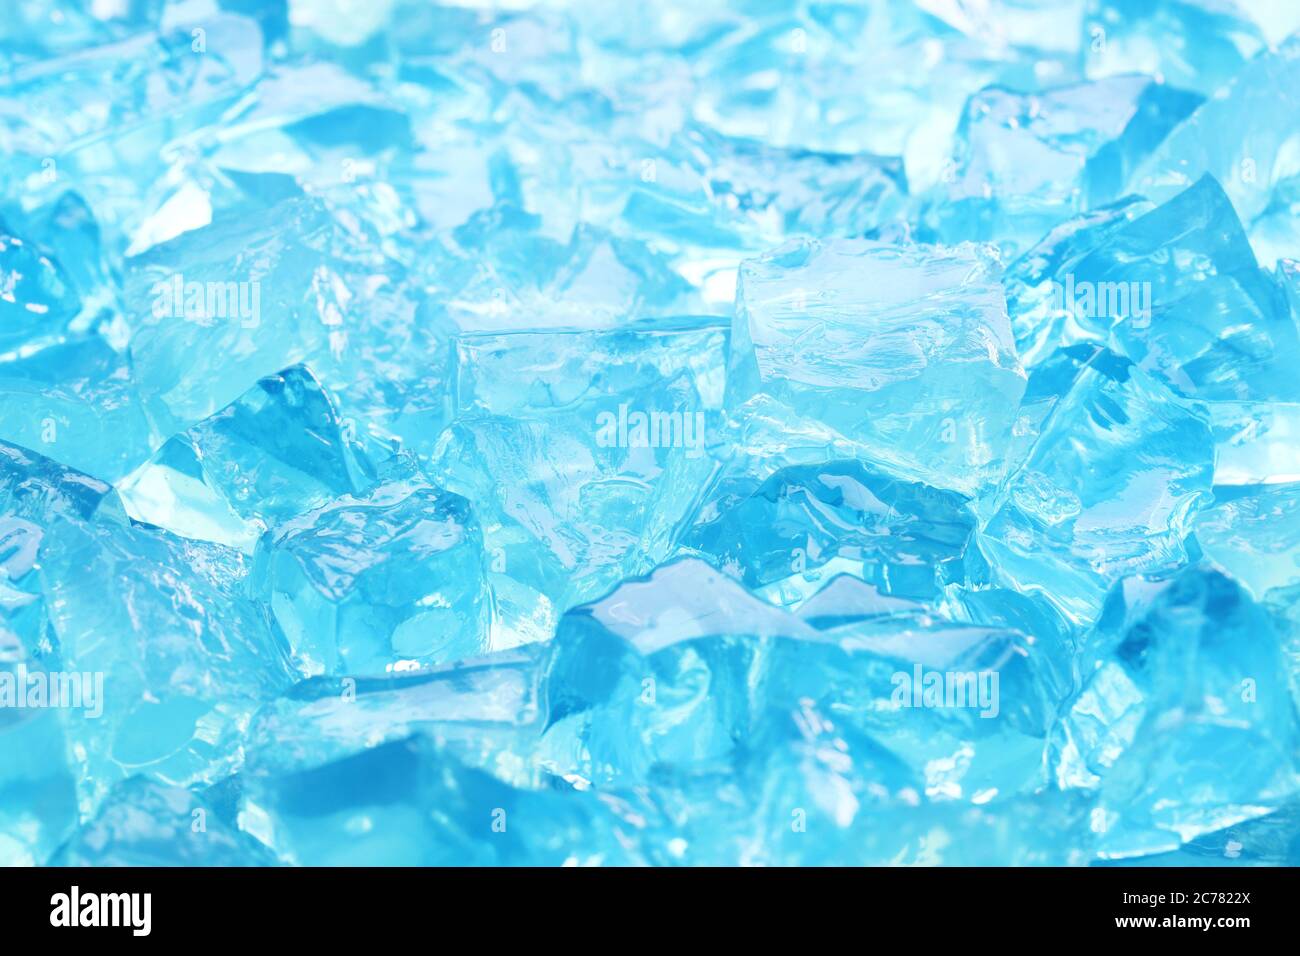 https://c8.alamy.com/comp/2C7822X/summer-blue-ice-cube-abstract-or-pure-natural-frozen-water-texture-background-2C7822X.jpg